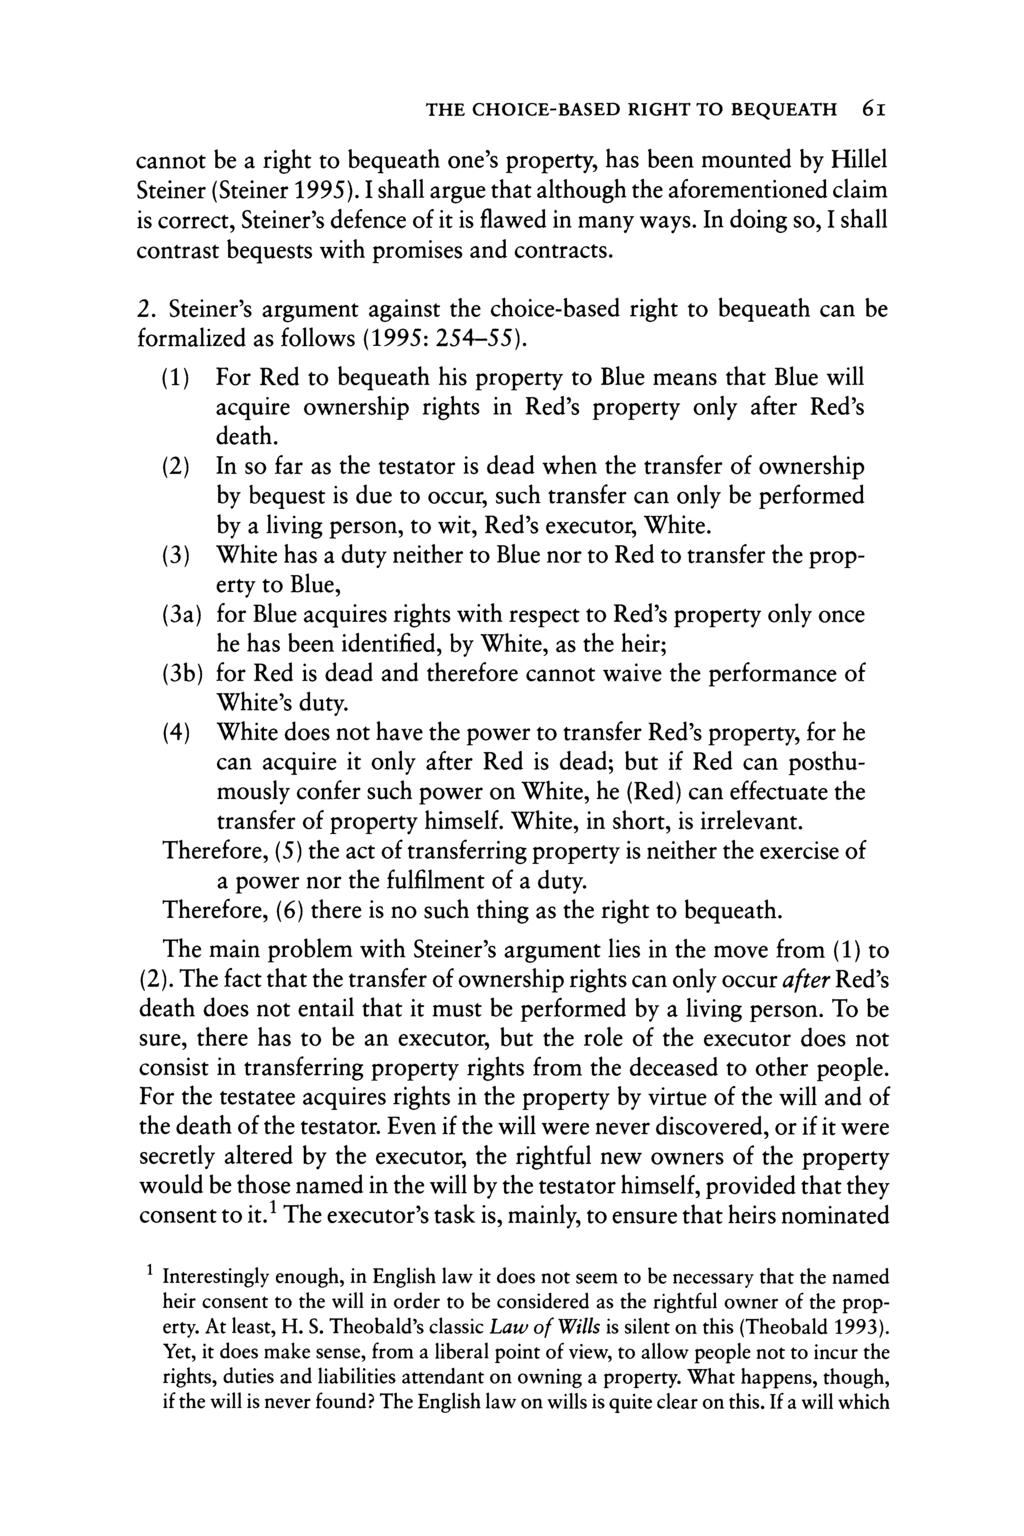 THE CHOICE-BASED RIGHT TO BEQUEATH 6I cannot be a righto bequeath one's property, has been mounted by Hillel Steiner (Steiner 1995).